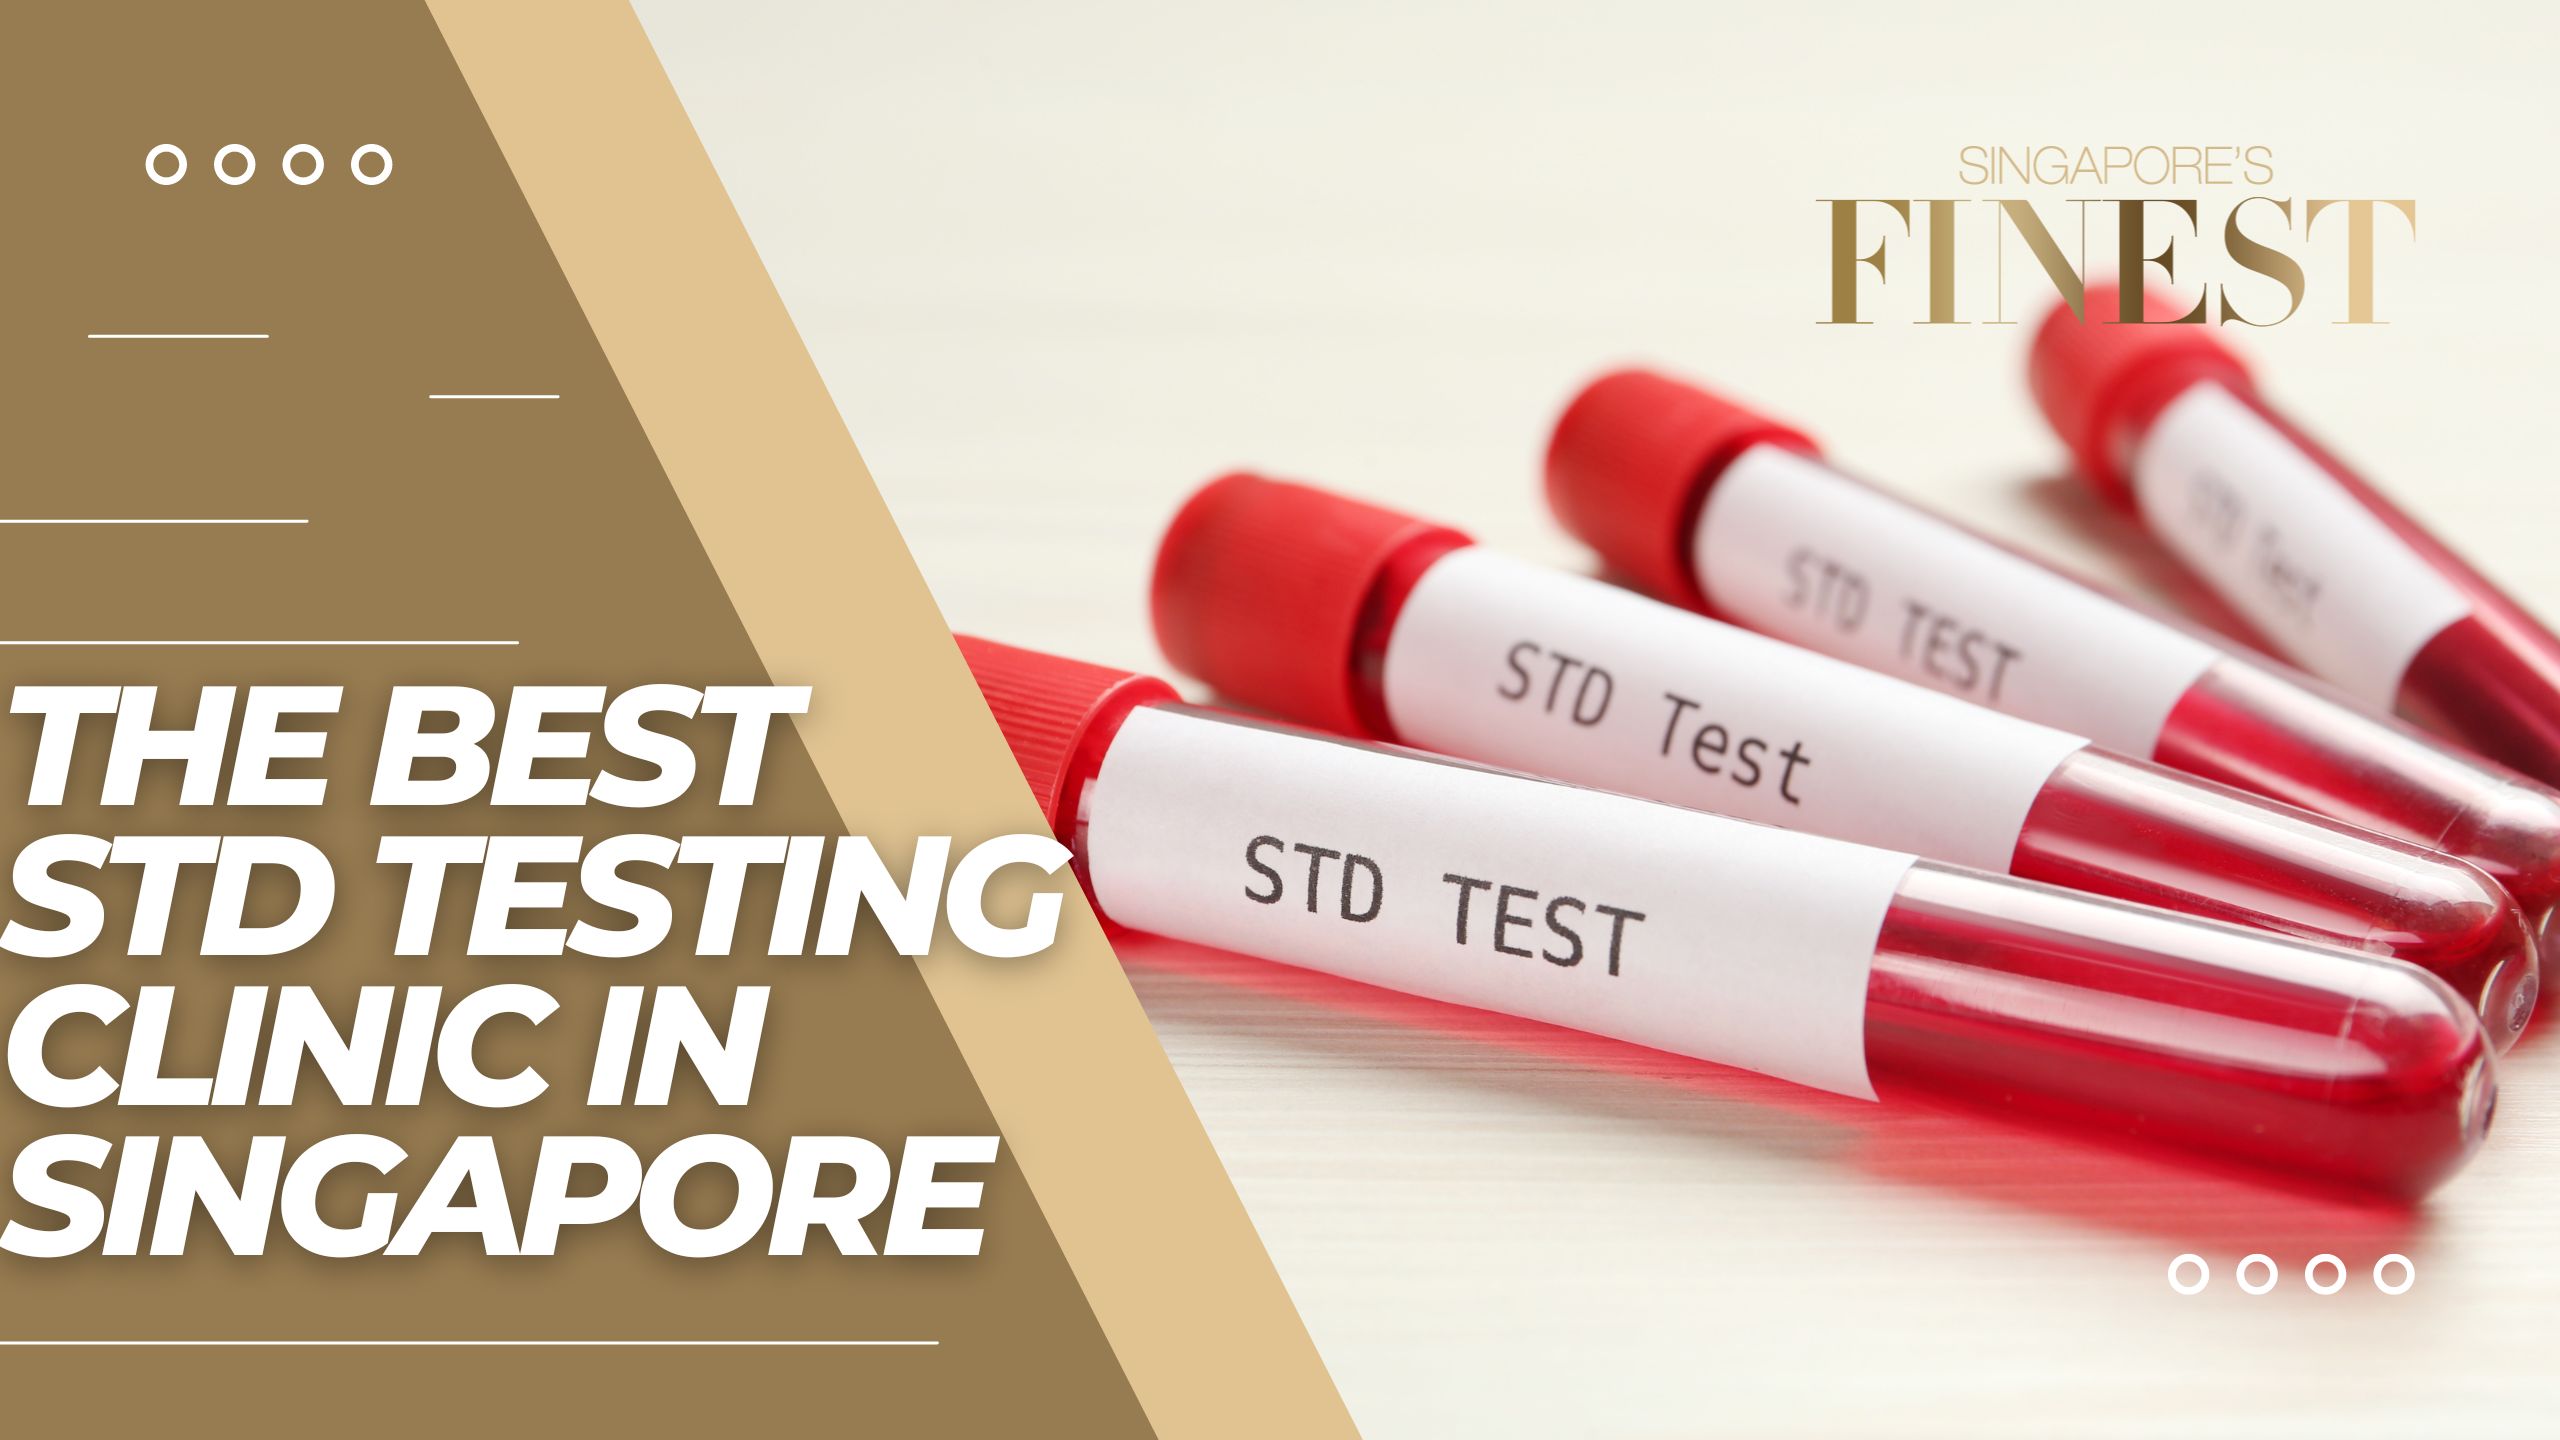 The Finest STD Testing Clinics in Singapore